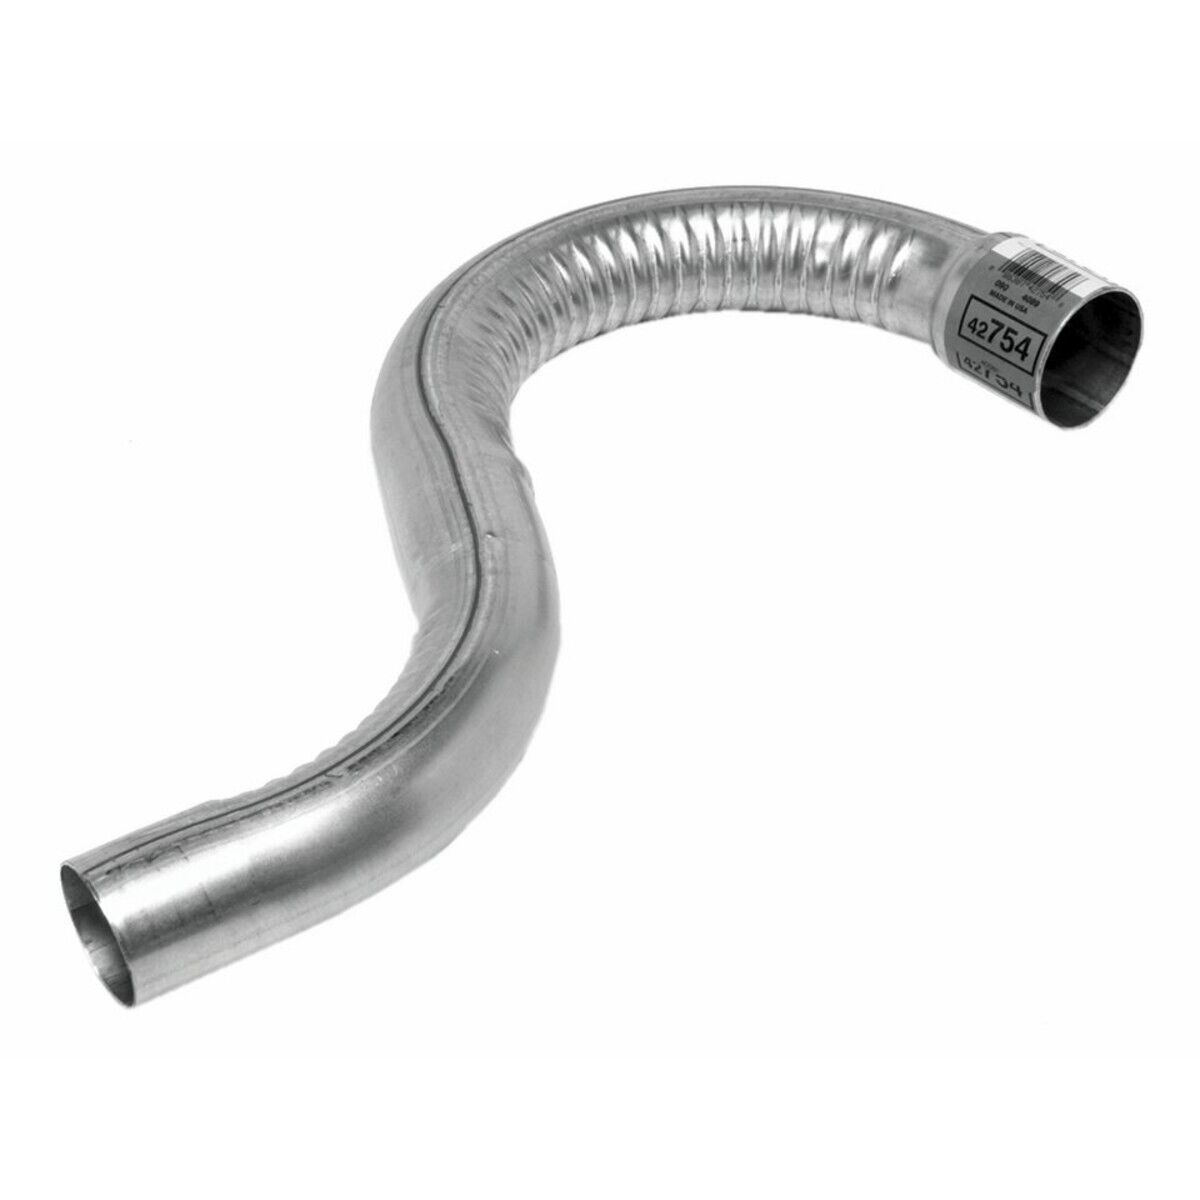 42754 Walker Exhaust Pipe for Volvo 740 940 760 780 745 1985